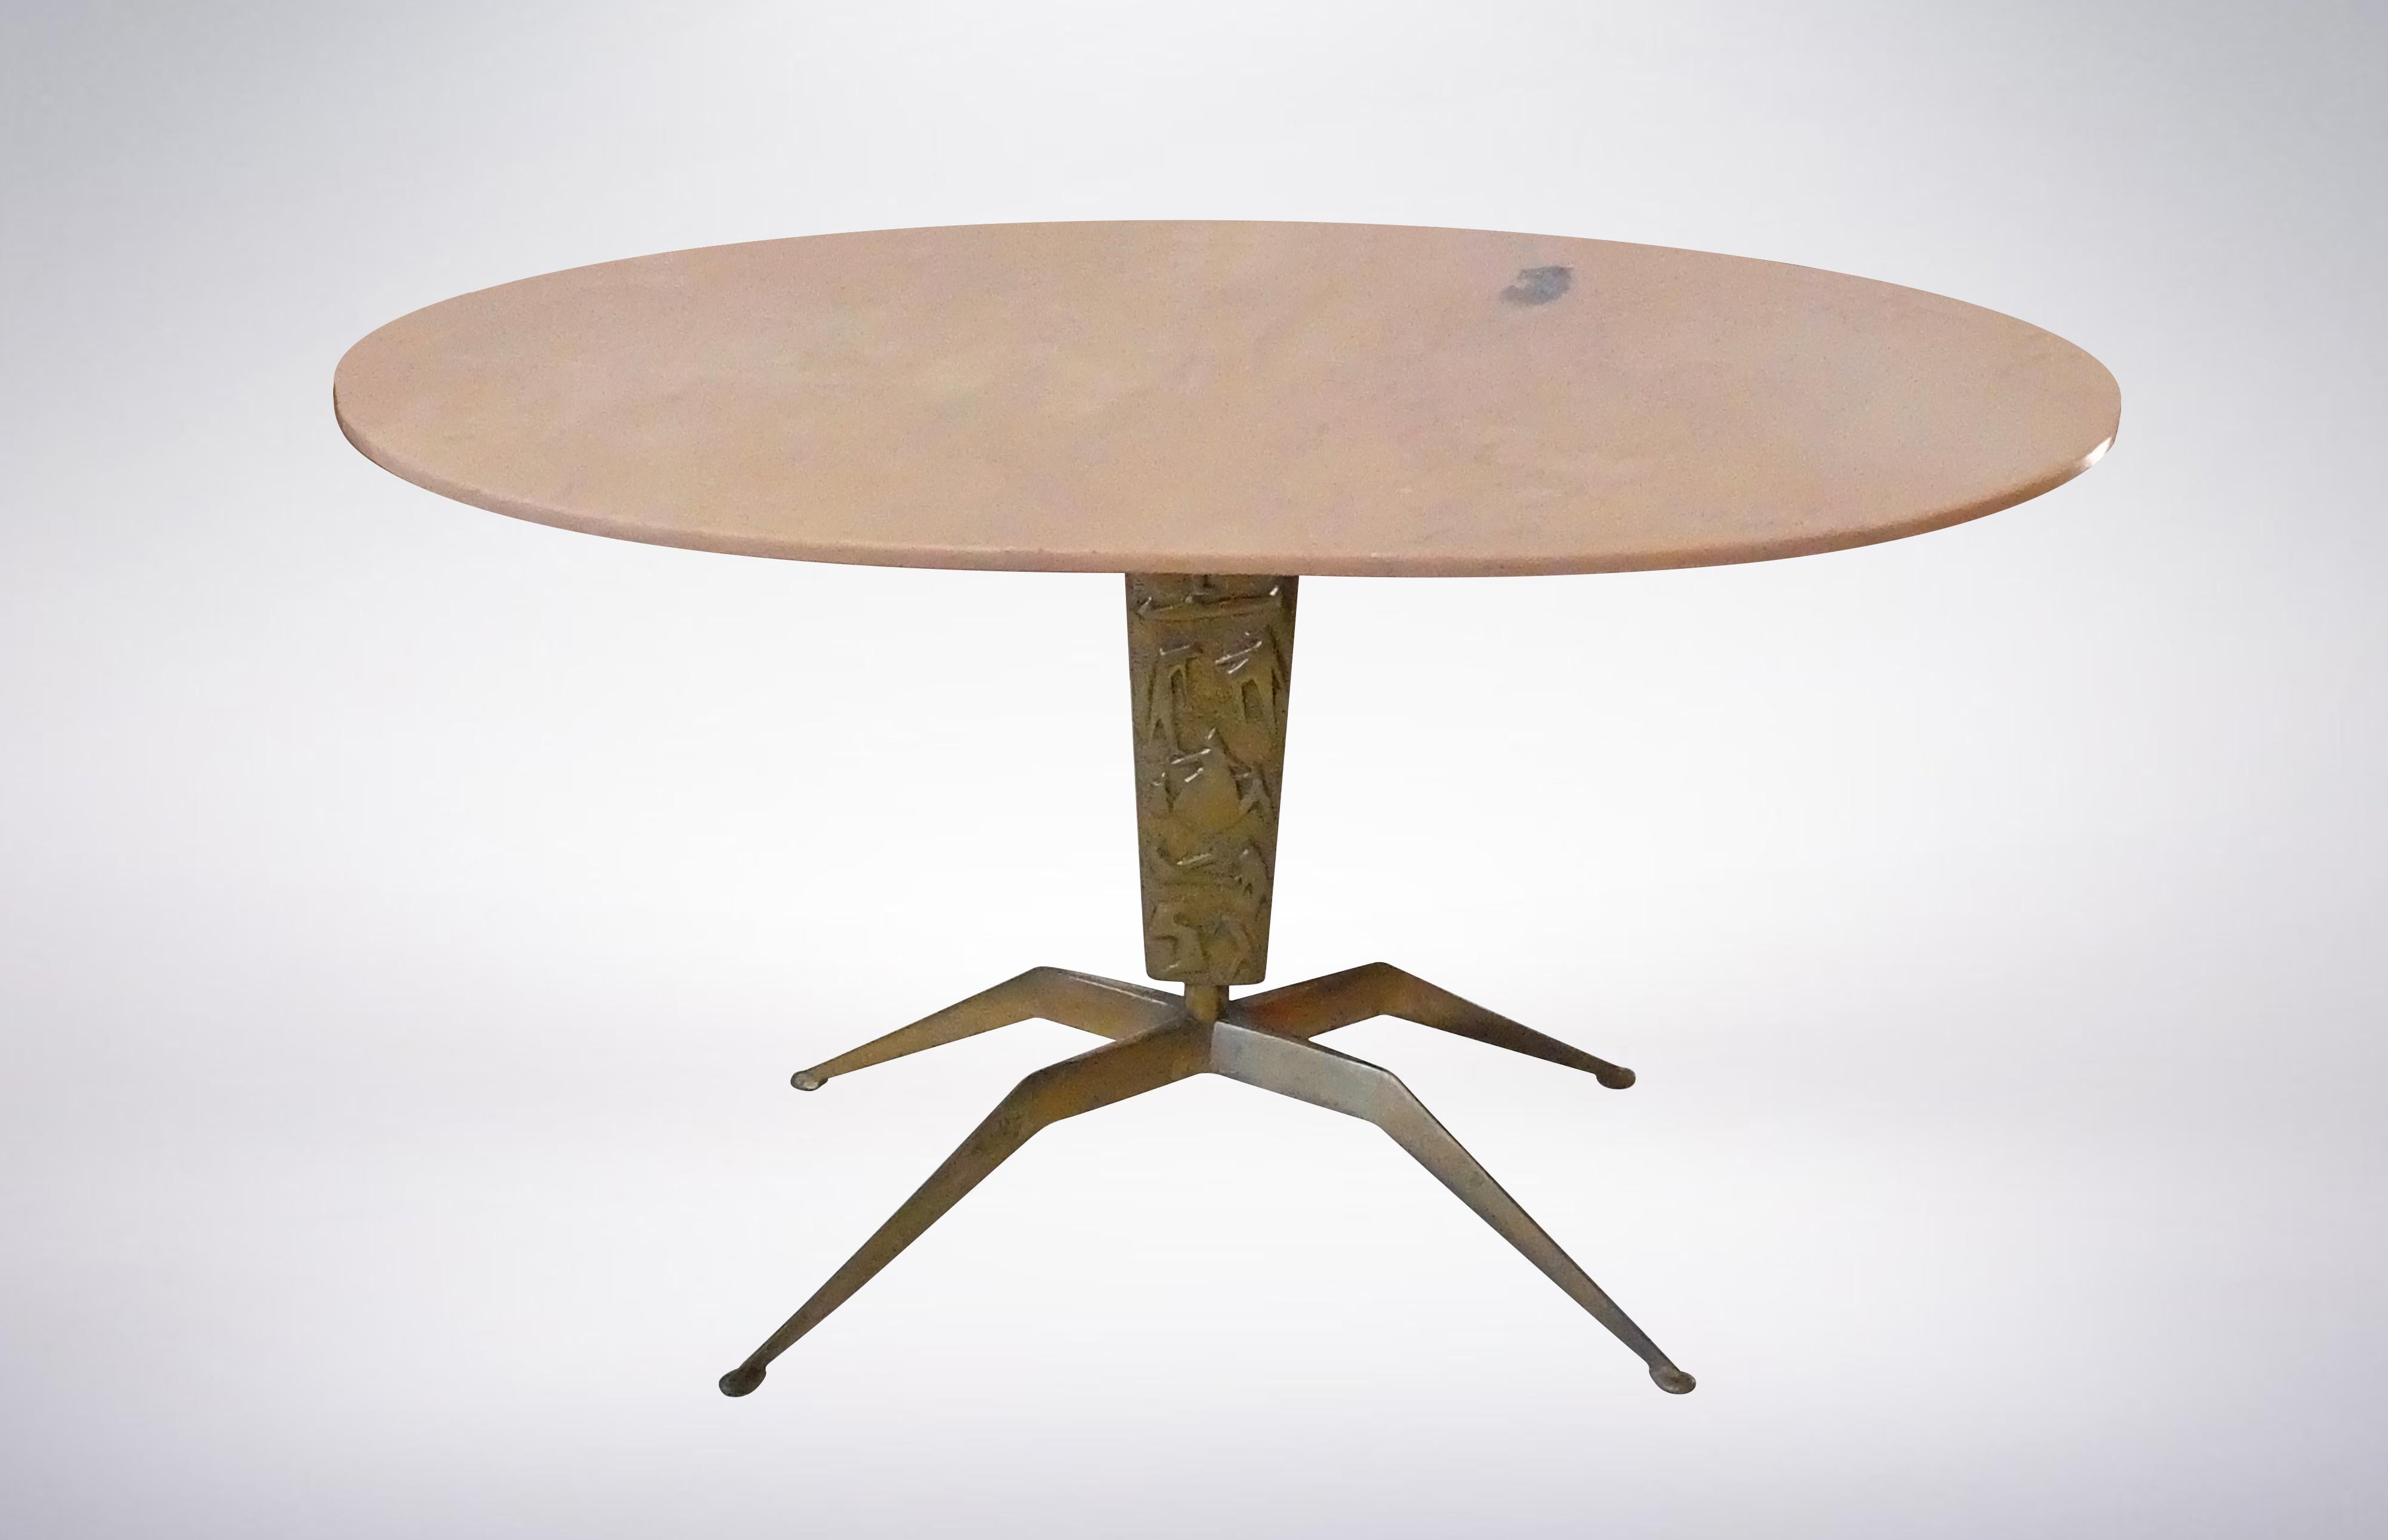 Fabulous Italian side table from the 1940s.